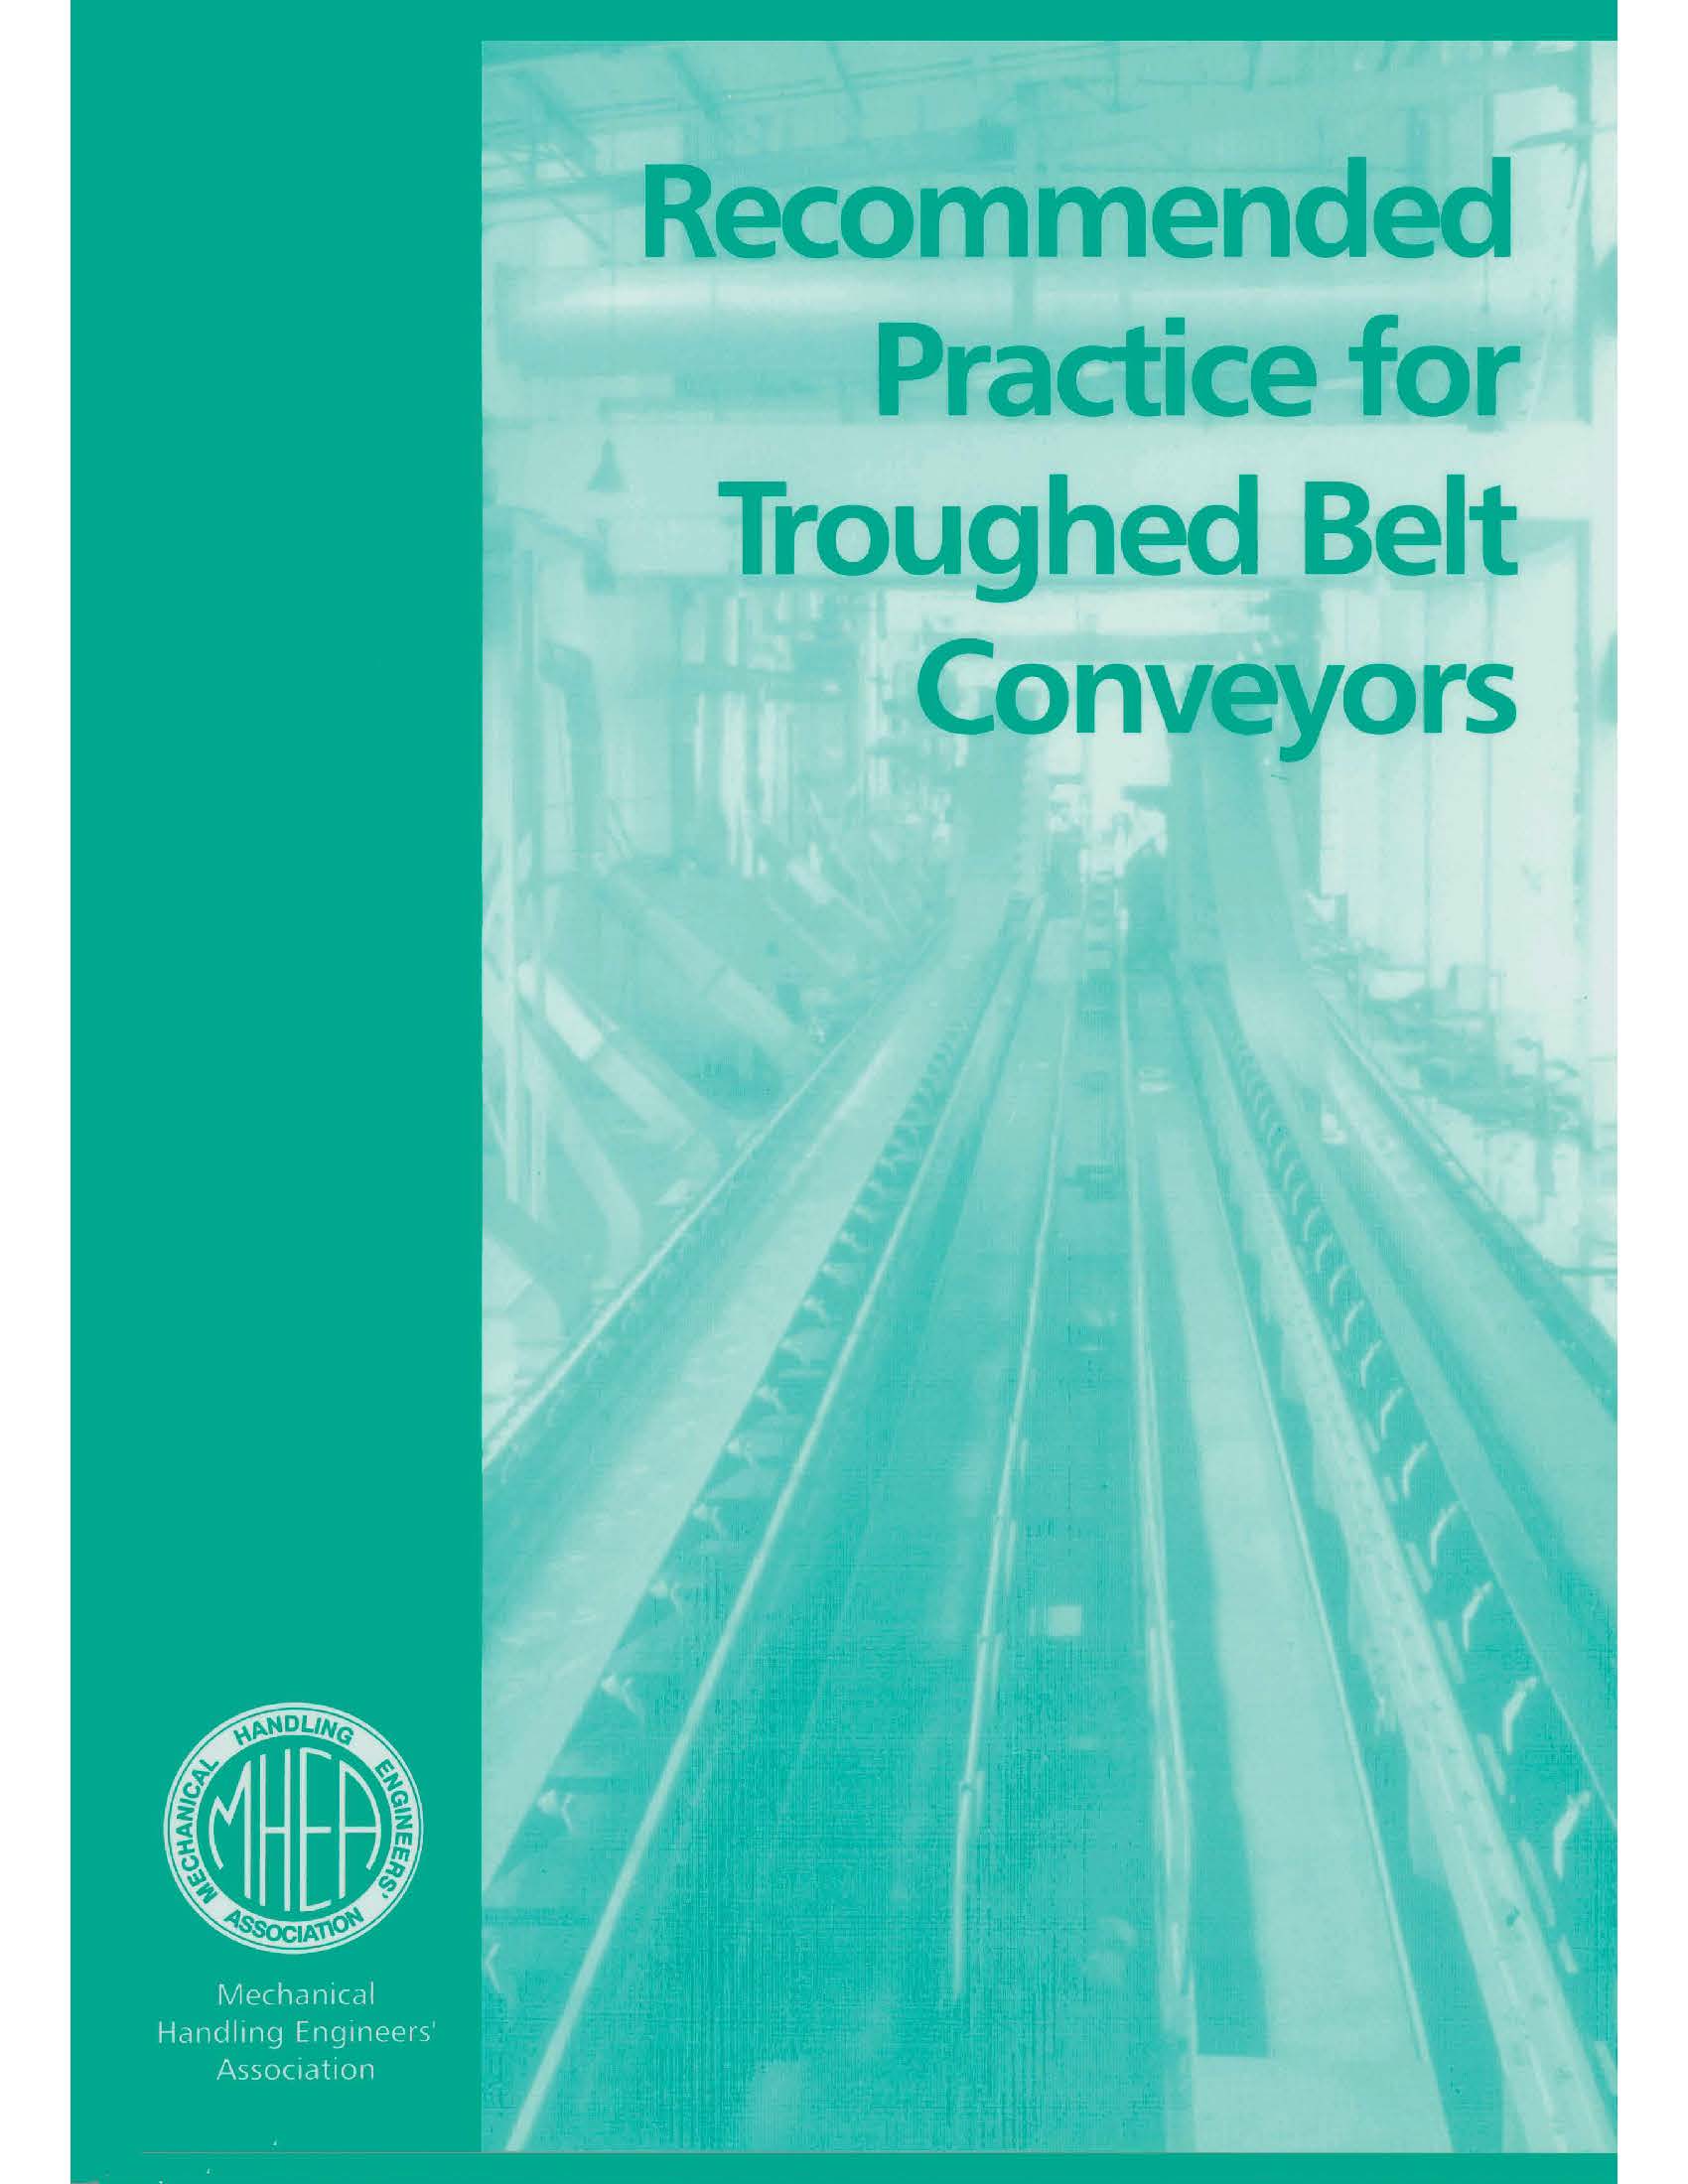 Non UK Purchases – Recommended Practice for Trough Belt Conveyors